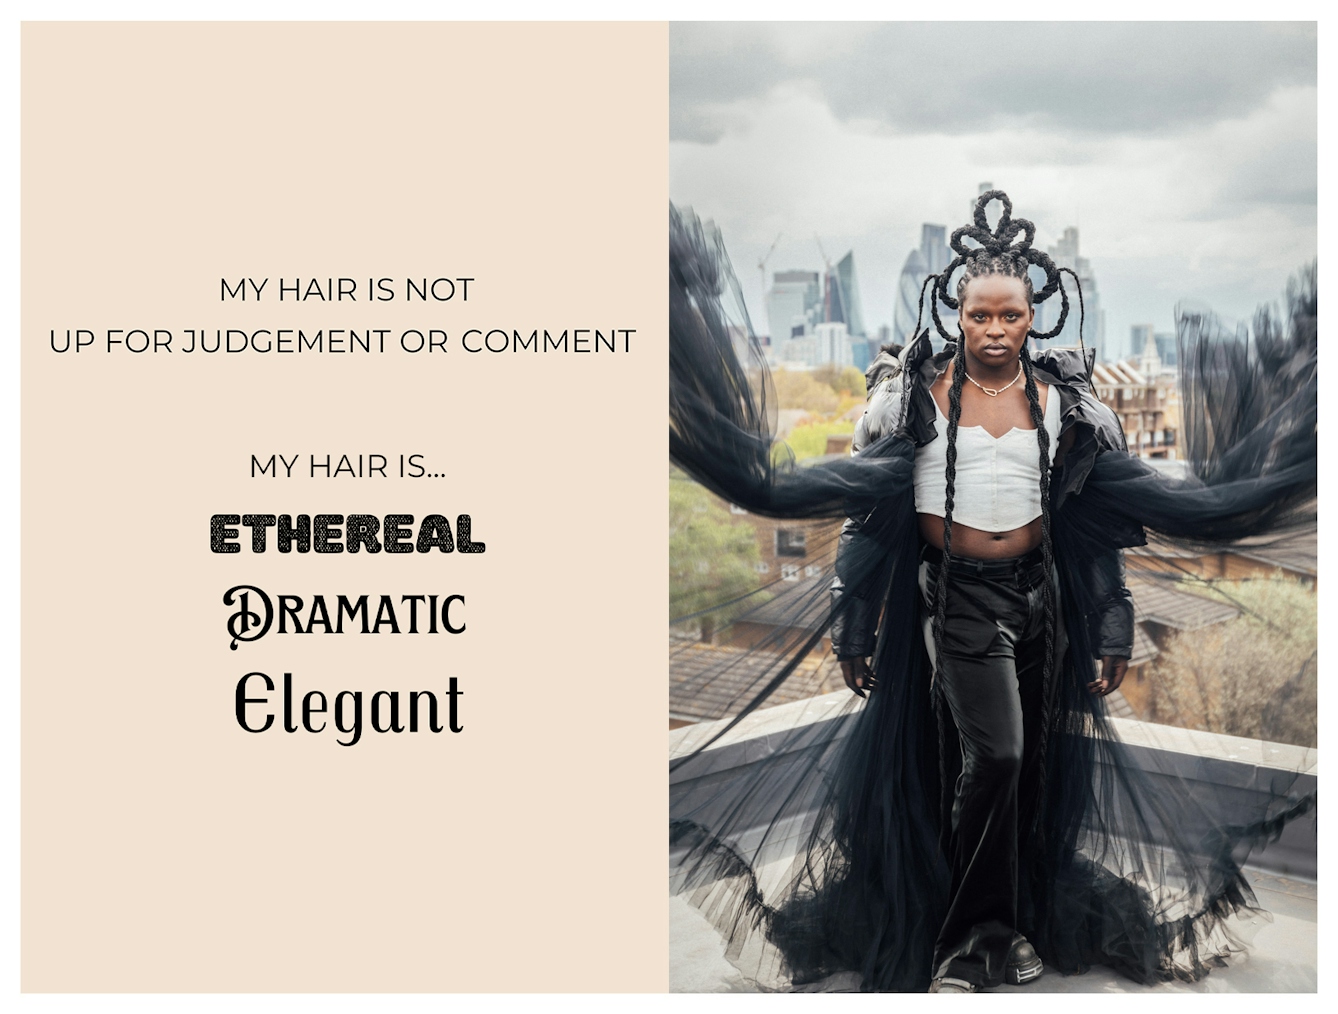 Photographic portrait and graphic design laid out next to each other. On the right is a striking portrait of Black individual in full length, stood on a roof with the London skyline behind them. They have a dramatic hair style made up of several long plaits/braids, curled into loops and secured into a sculptural form. The graphic to the left has a beige background on which are the words 'My hair is not up for judgment or comment. My hair is...ethereal, dramatic, elegant'. These last three words are each in a different font to emphasise their meaning.